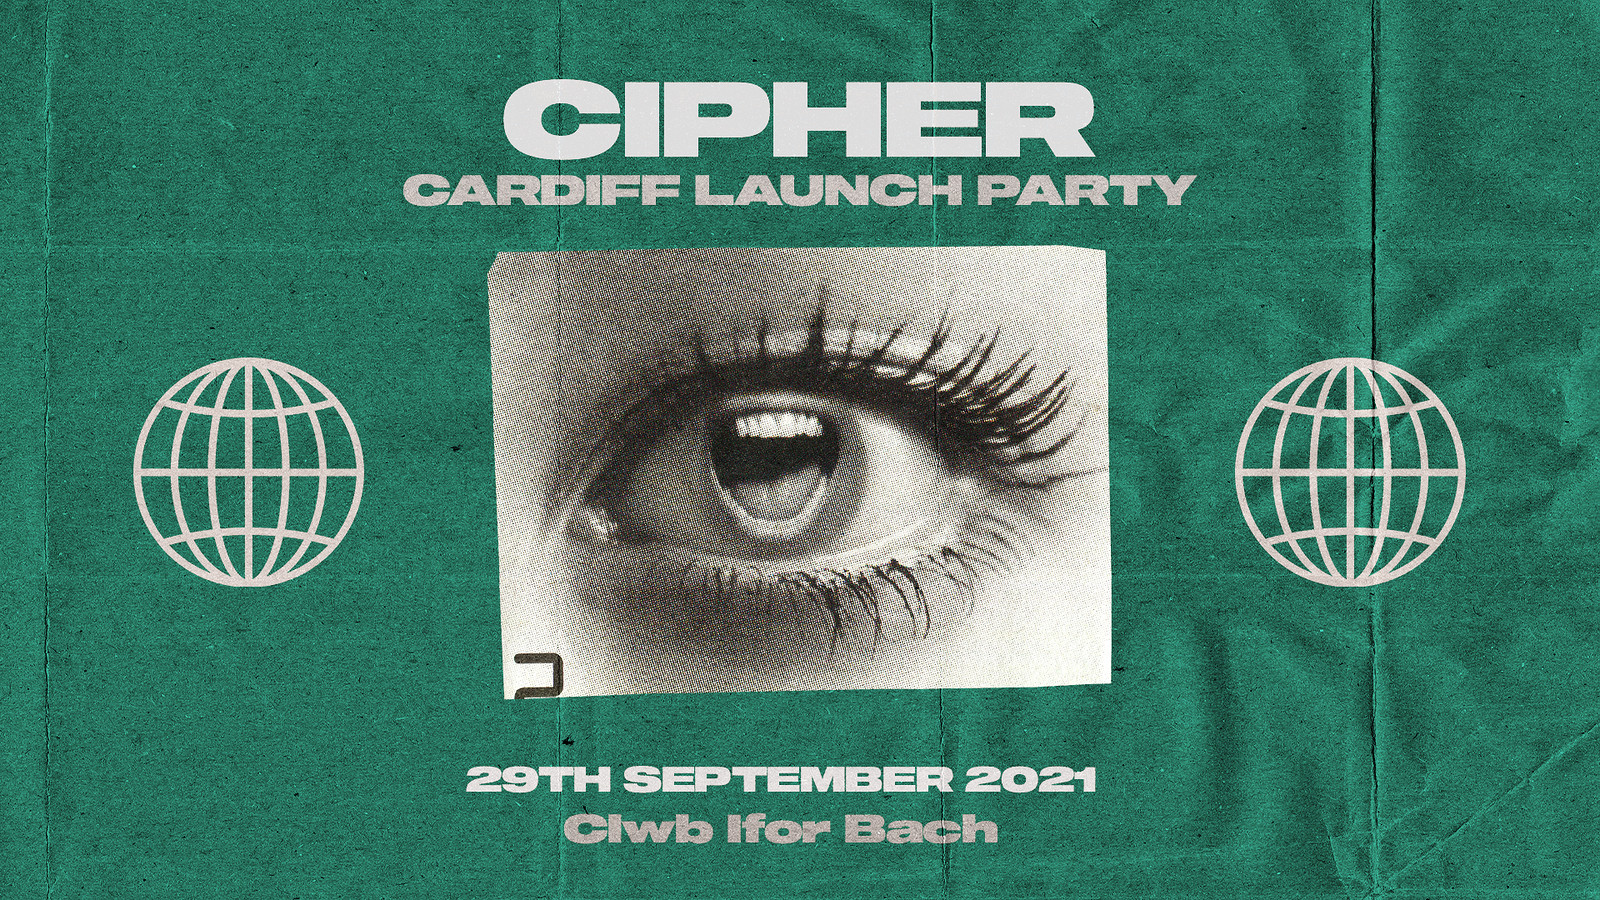 Cipher: Cardiff Launch Party at Clwb iFor Bach